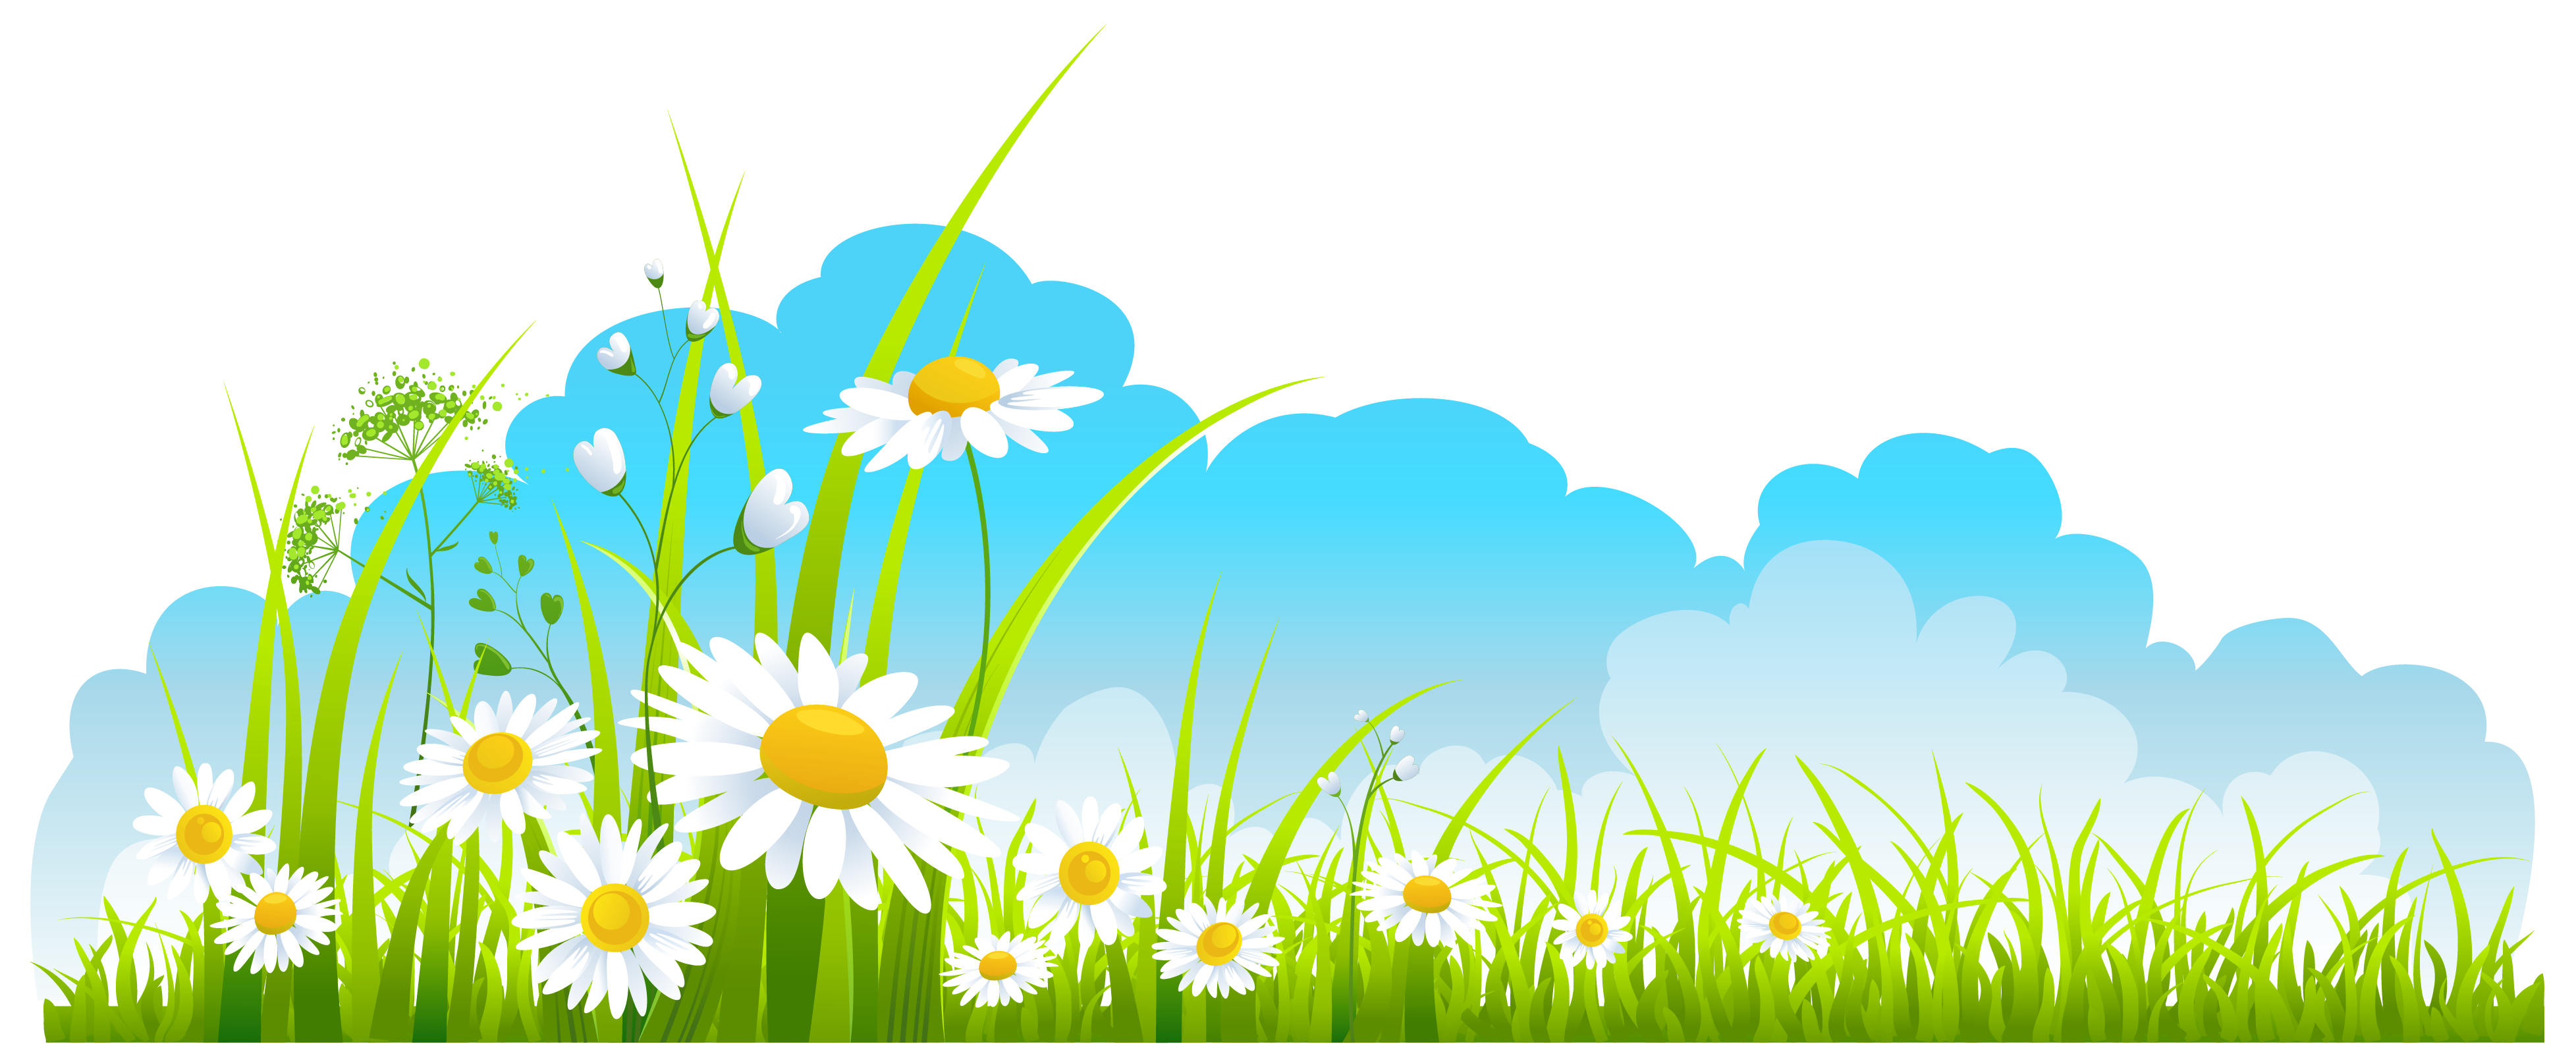 transparent spring picture with sky and flowers download #41518